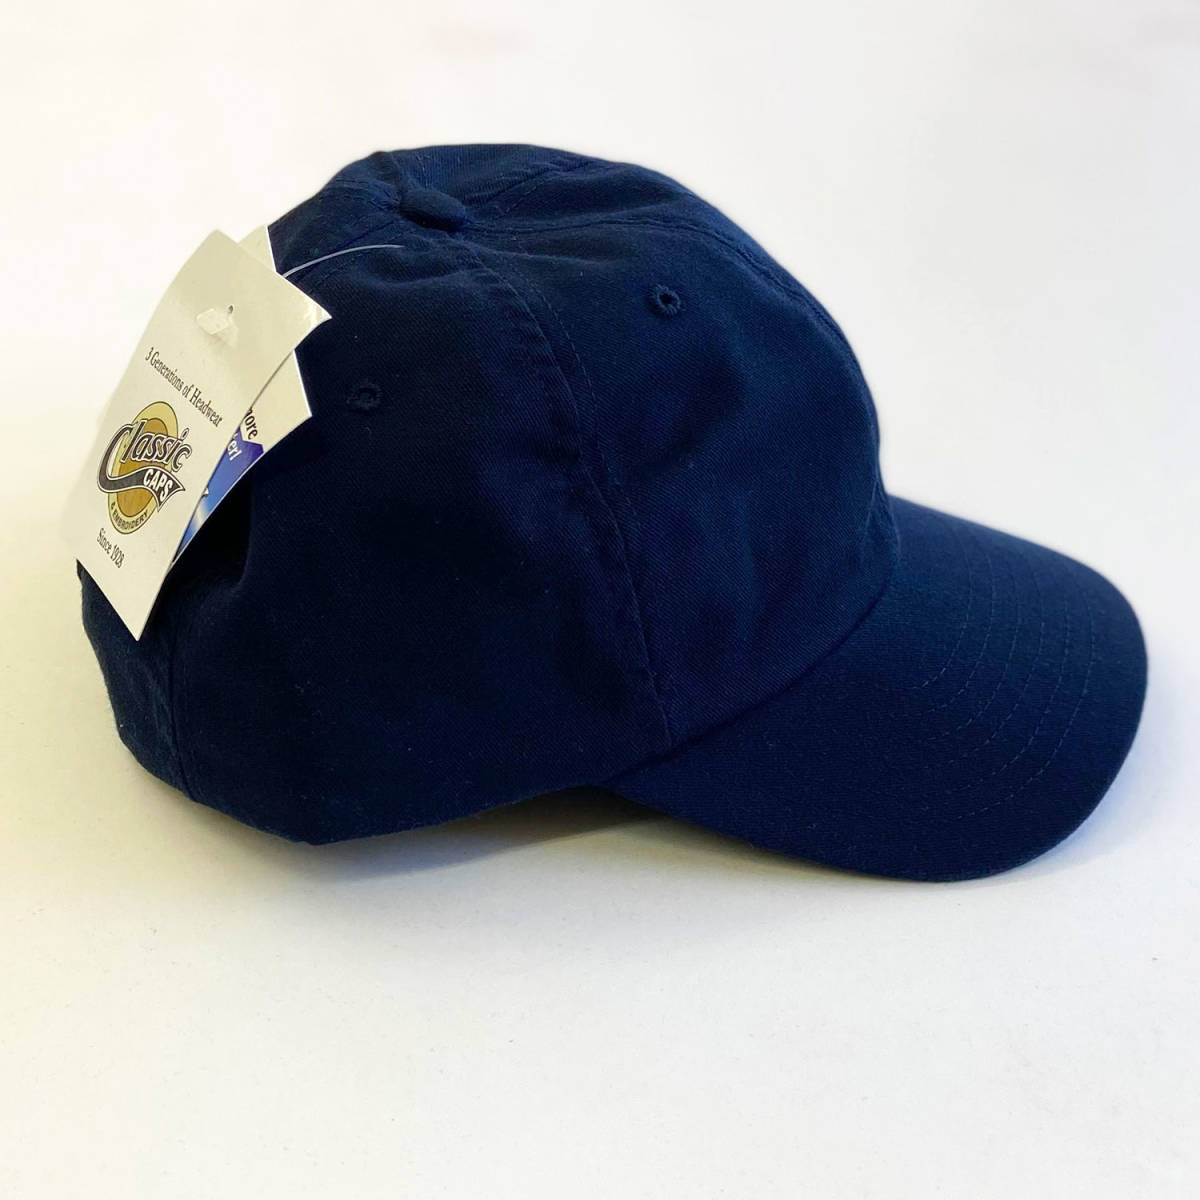 CLASSIC CAPS　クラシックキャップス キャップ ネイビー　USA MADE CAP MADE IN USA アメリカ製_画像2